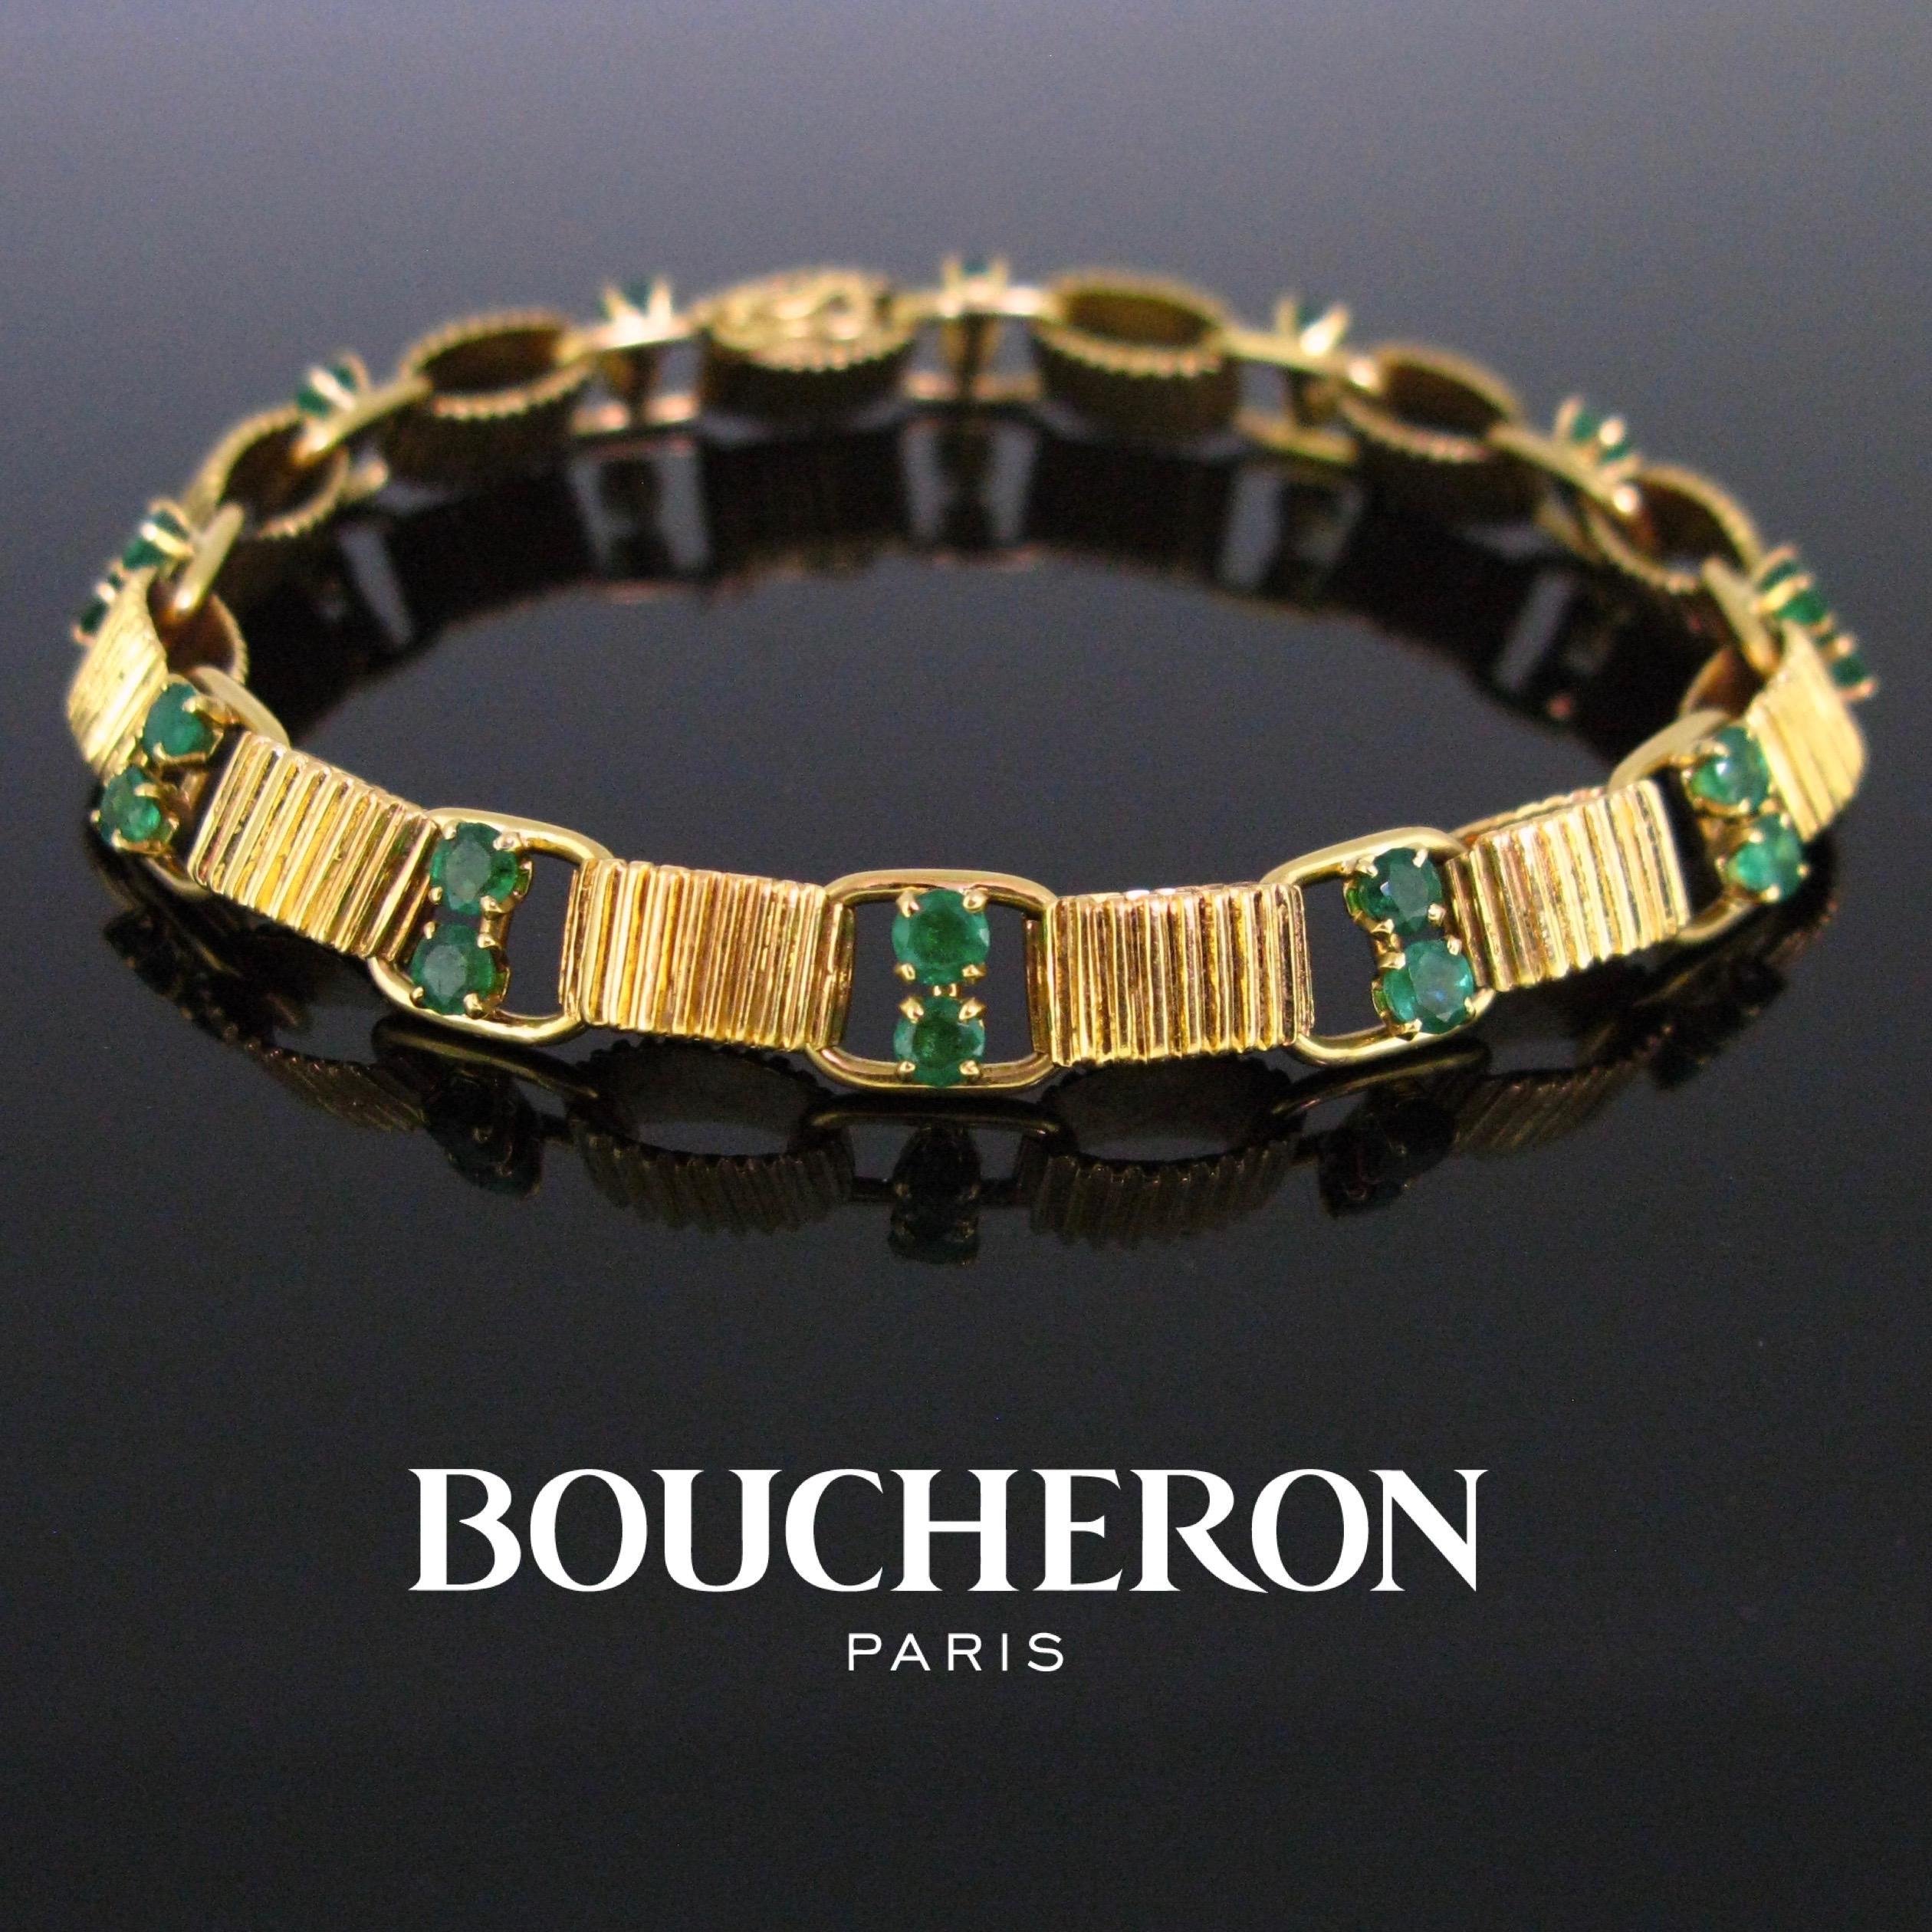 This bracelet is from the Sixties. It features 12 ribbed linked interspersed with 24 round emeralds. It is made in 18kt yellow gold. The clasp is hidden and it is secured with a strap. This bracelet is everyday wearable. It is signed Boucheron